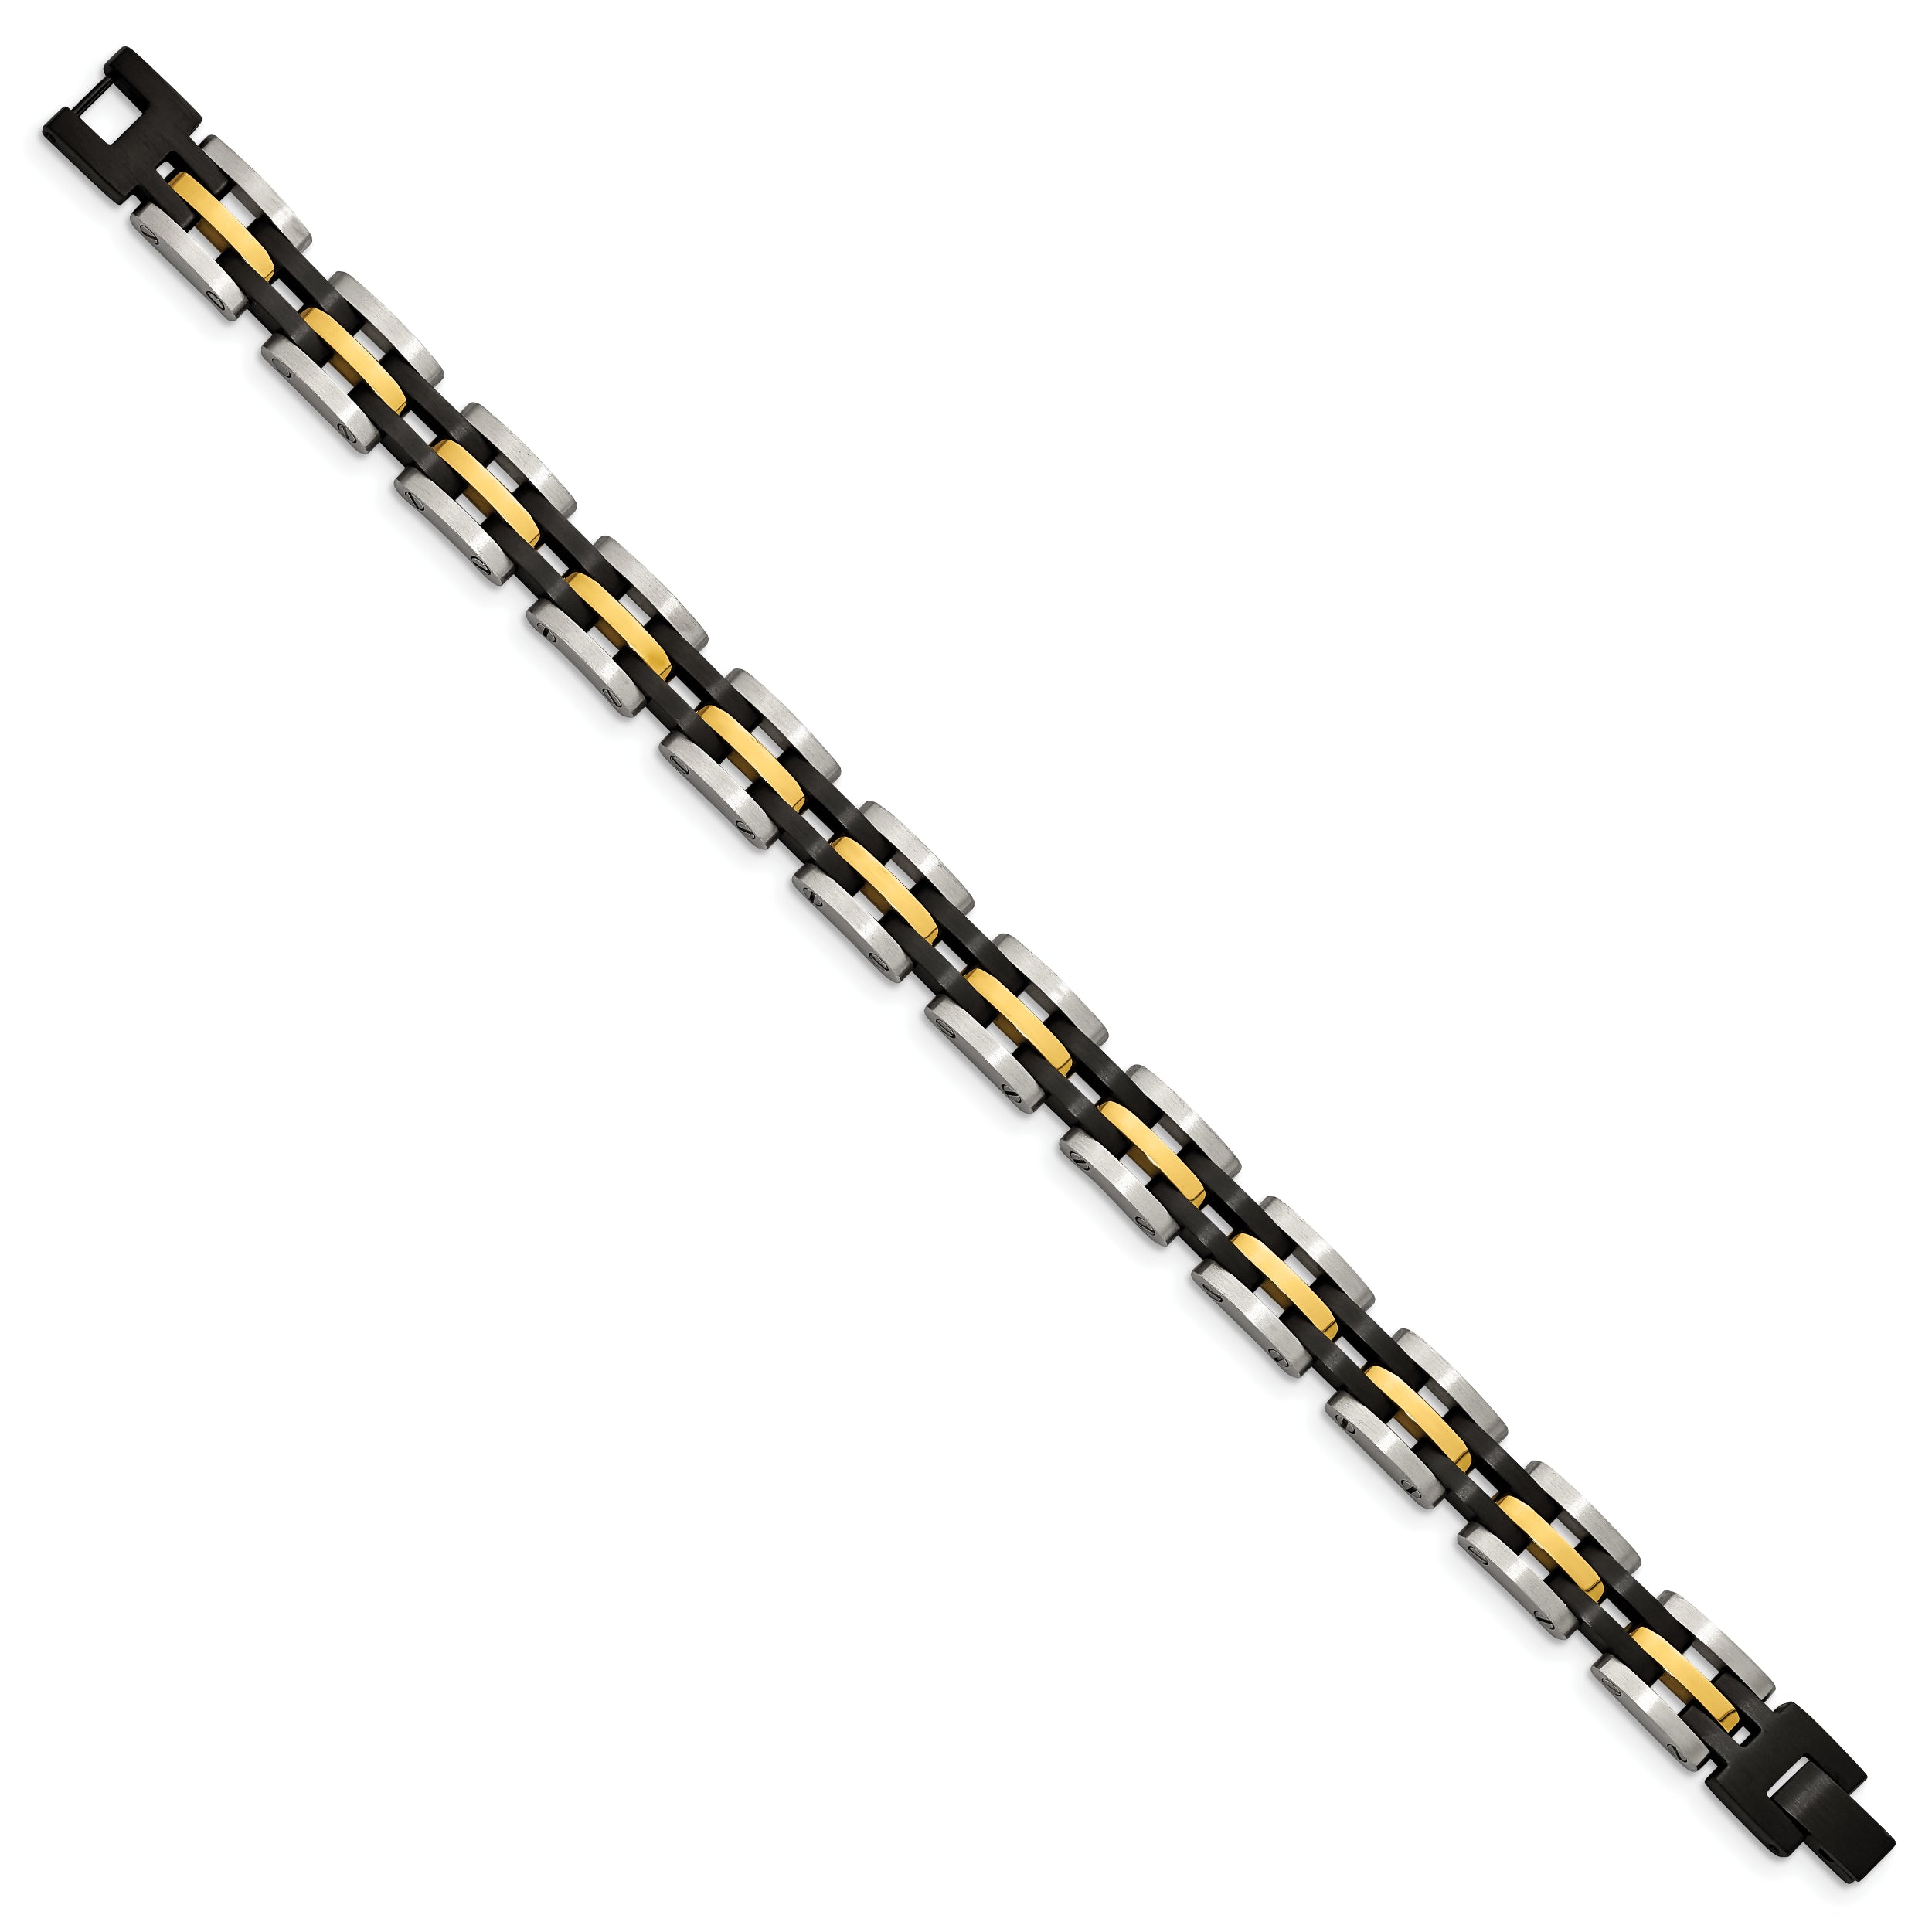 Chisel Stainless Steel Brushed and Polished Black and Yellow IP-plated 8.25 inch Link Bracelet